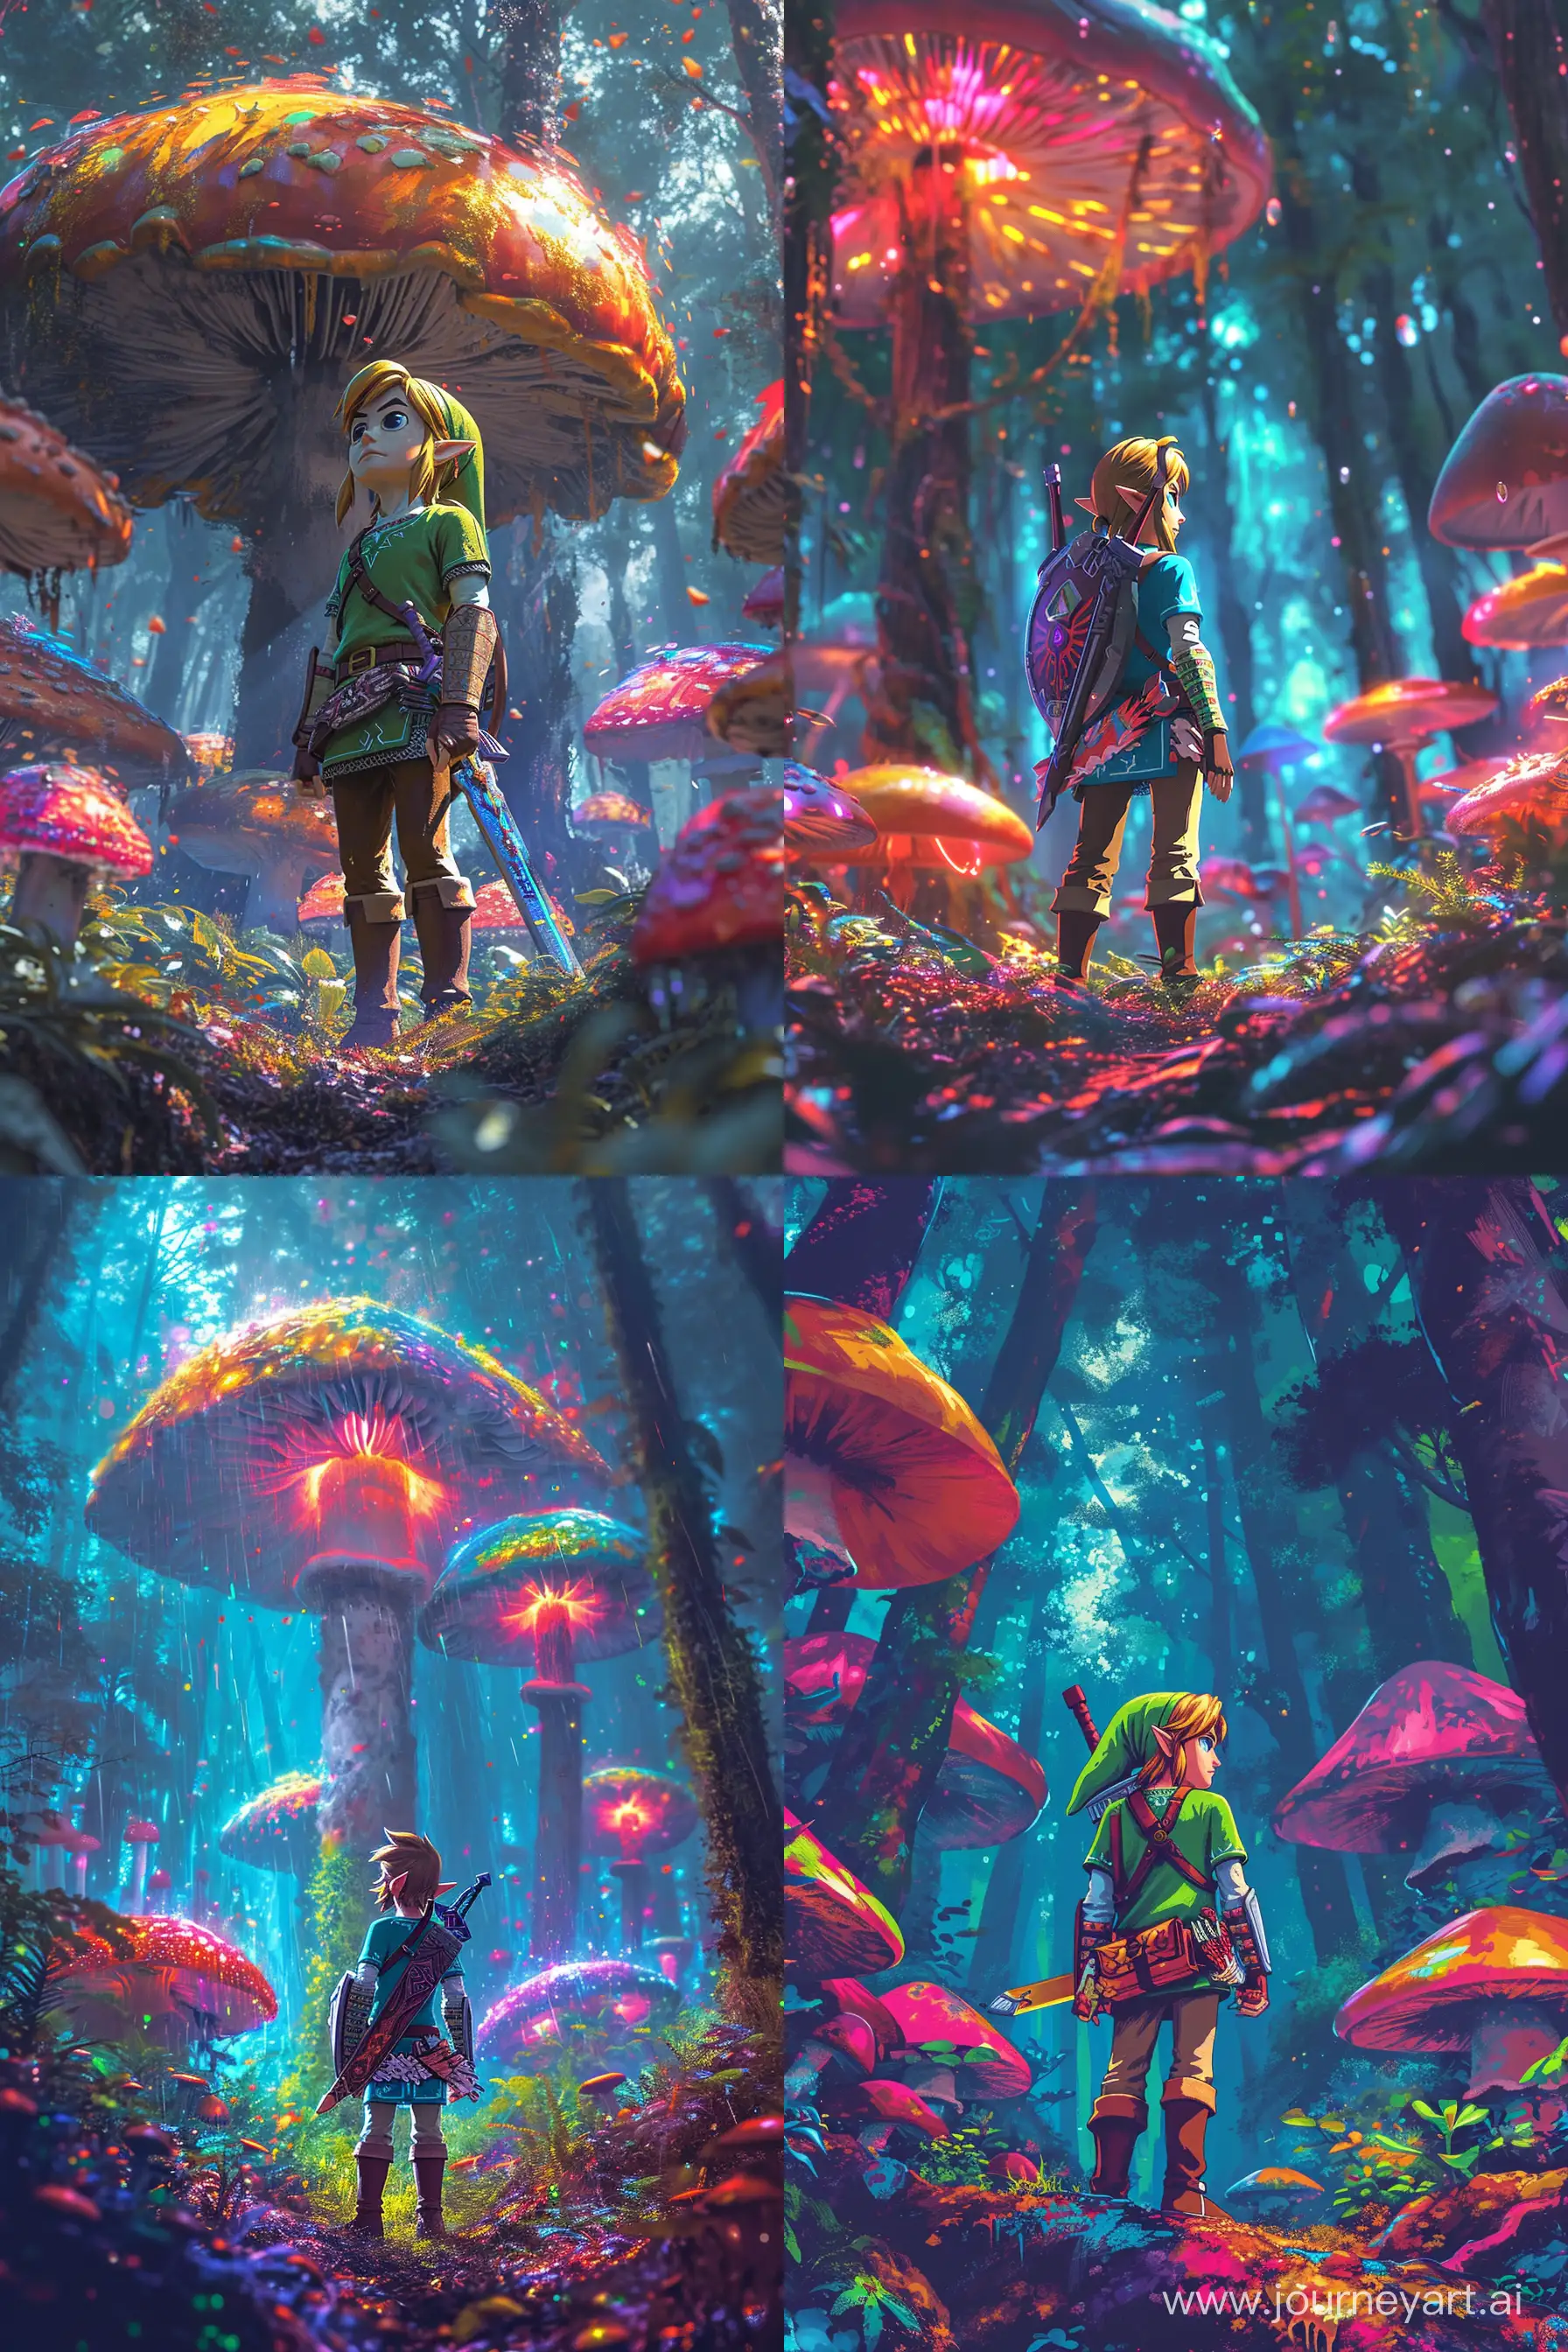 legend of Zelda character named Link standing in the forest, Rick and Morty multiple color mushroom forest background, rainbow color, close up, neon light, clean and transparent, strong vibrant color, contract dark blue tone   --v 6 --s 300 --ar 30:45 --c 0 --q 1